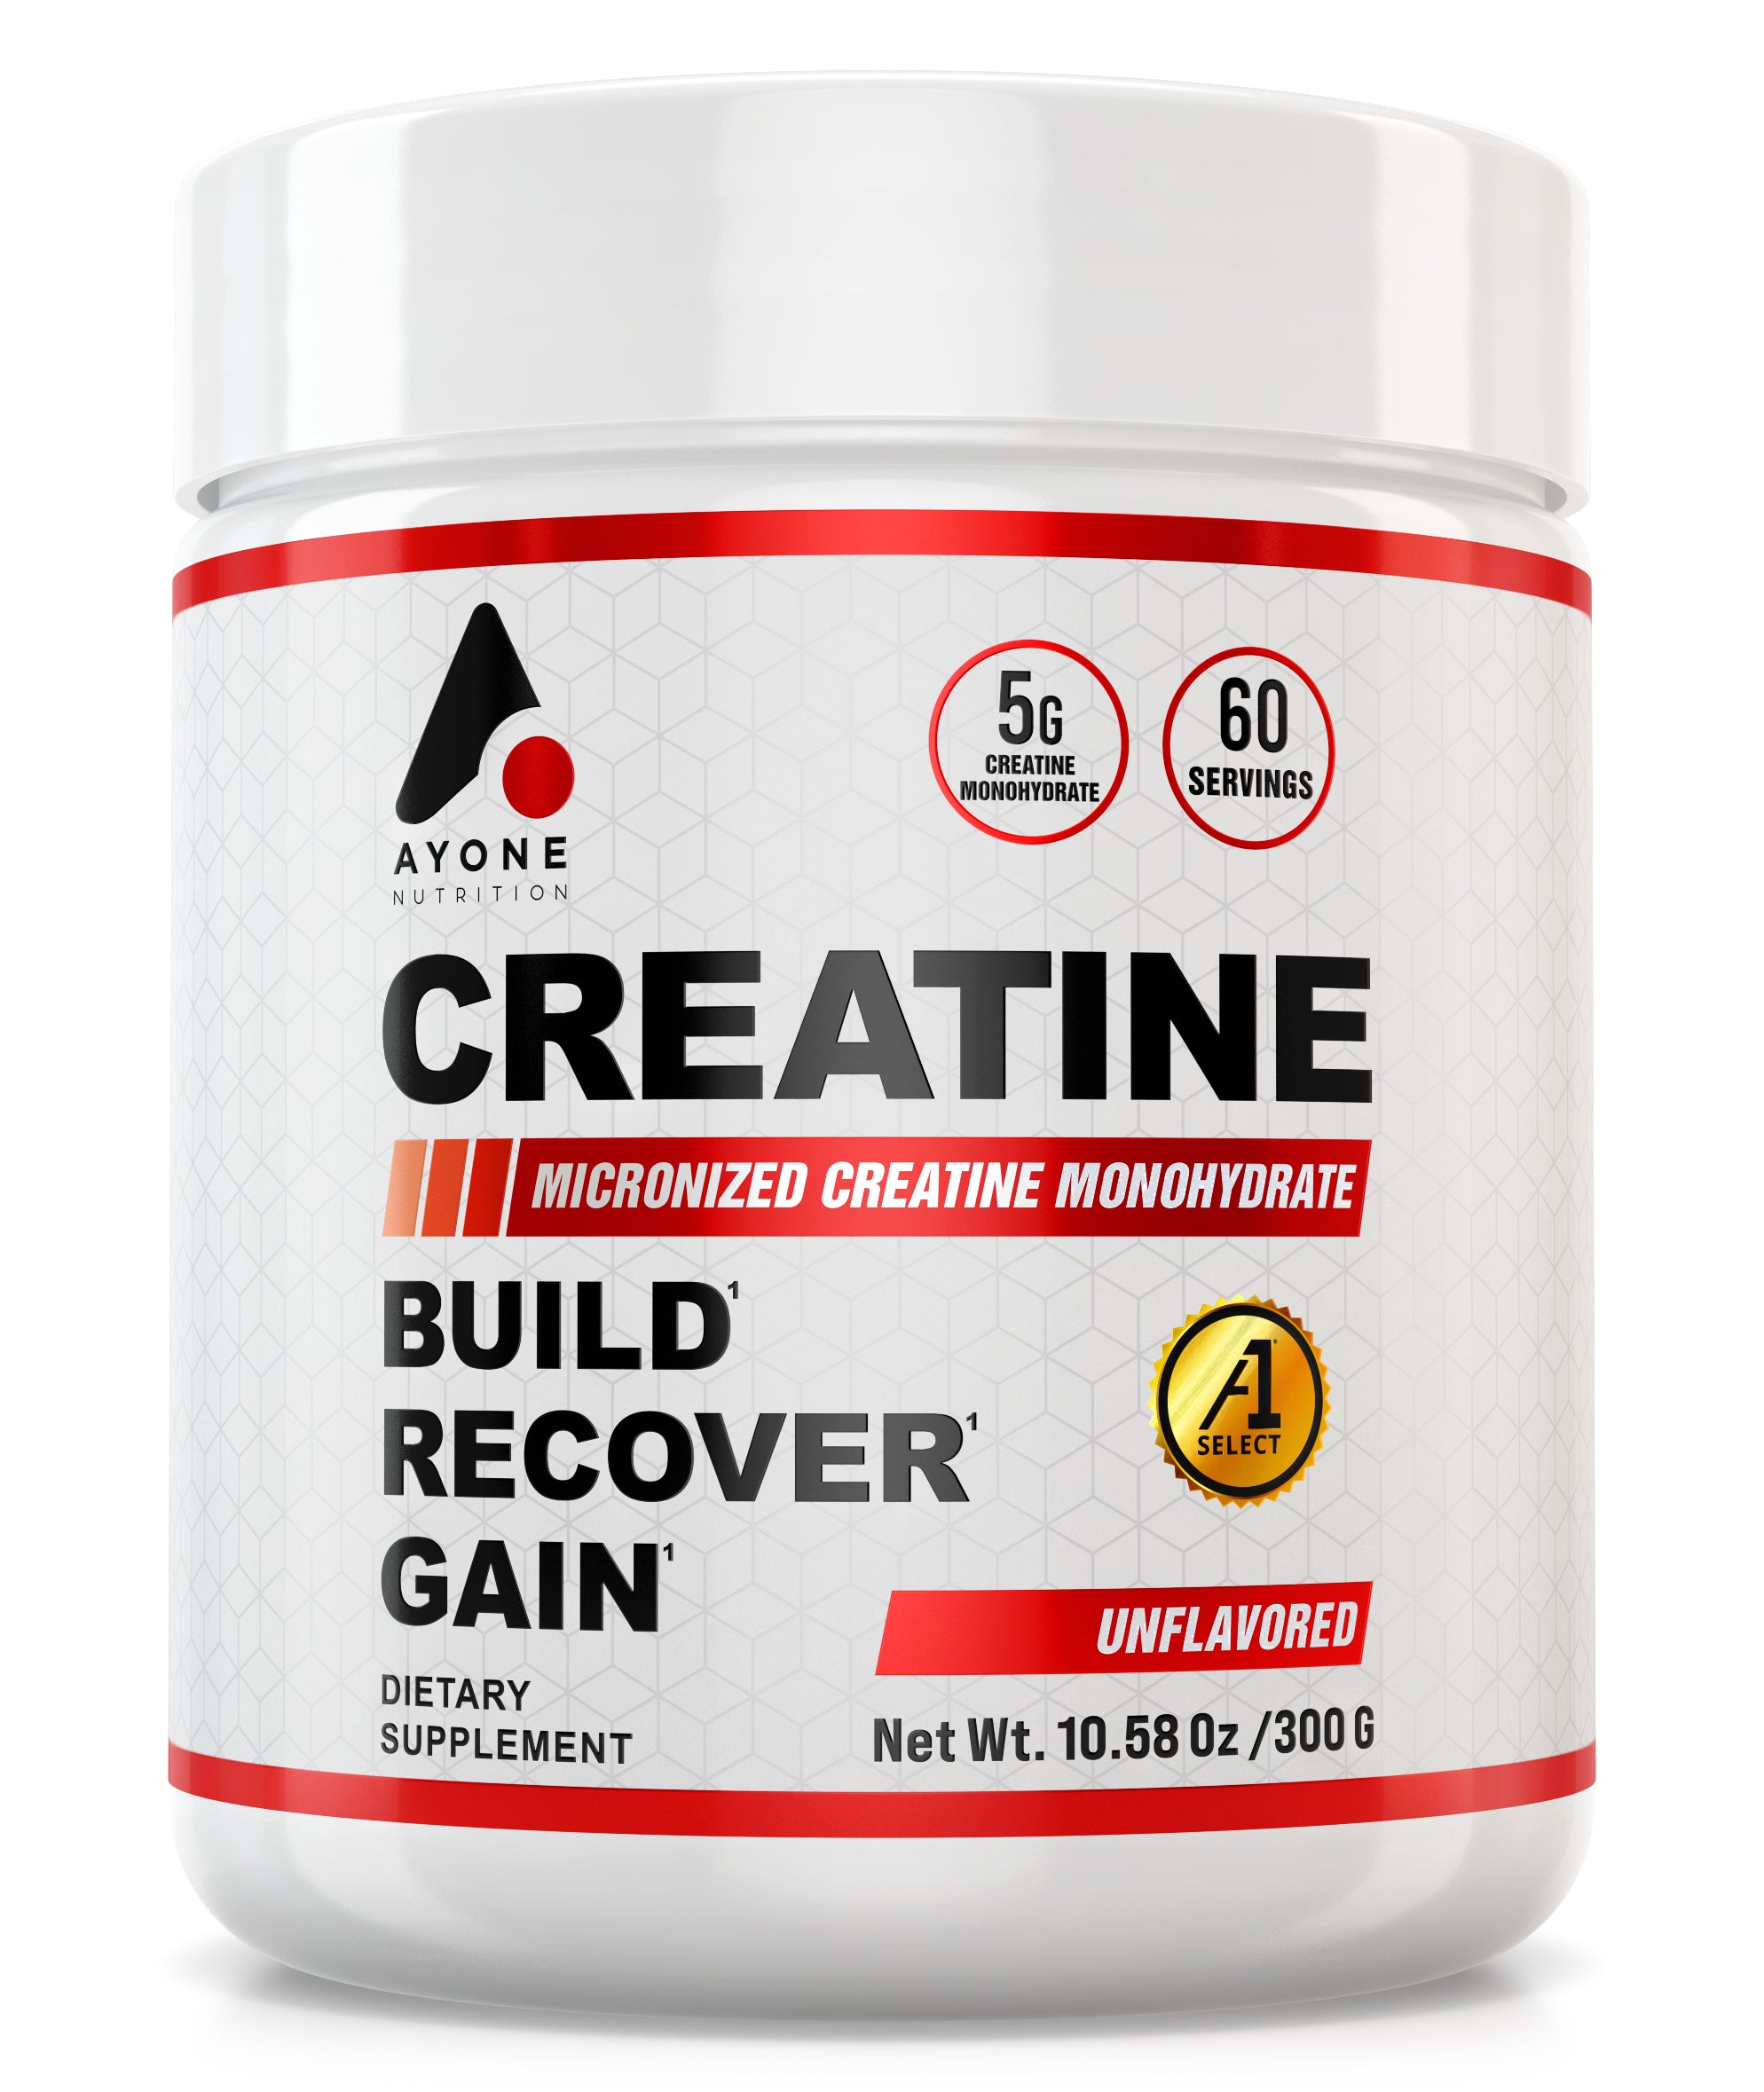 Ayone Nutrition Creatine front of the bottle